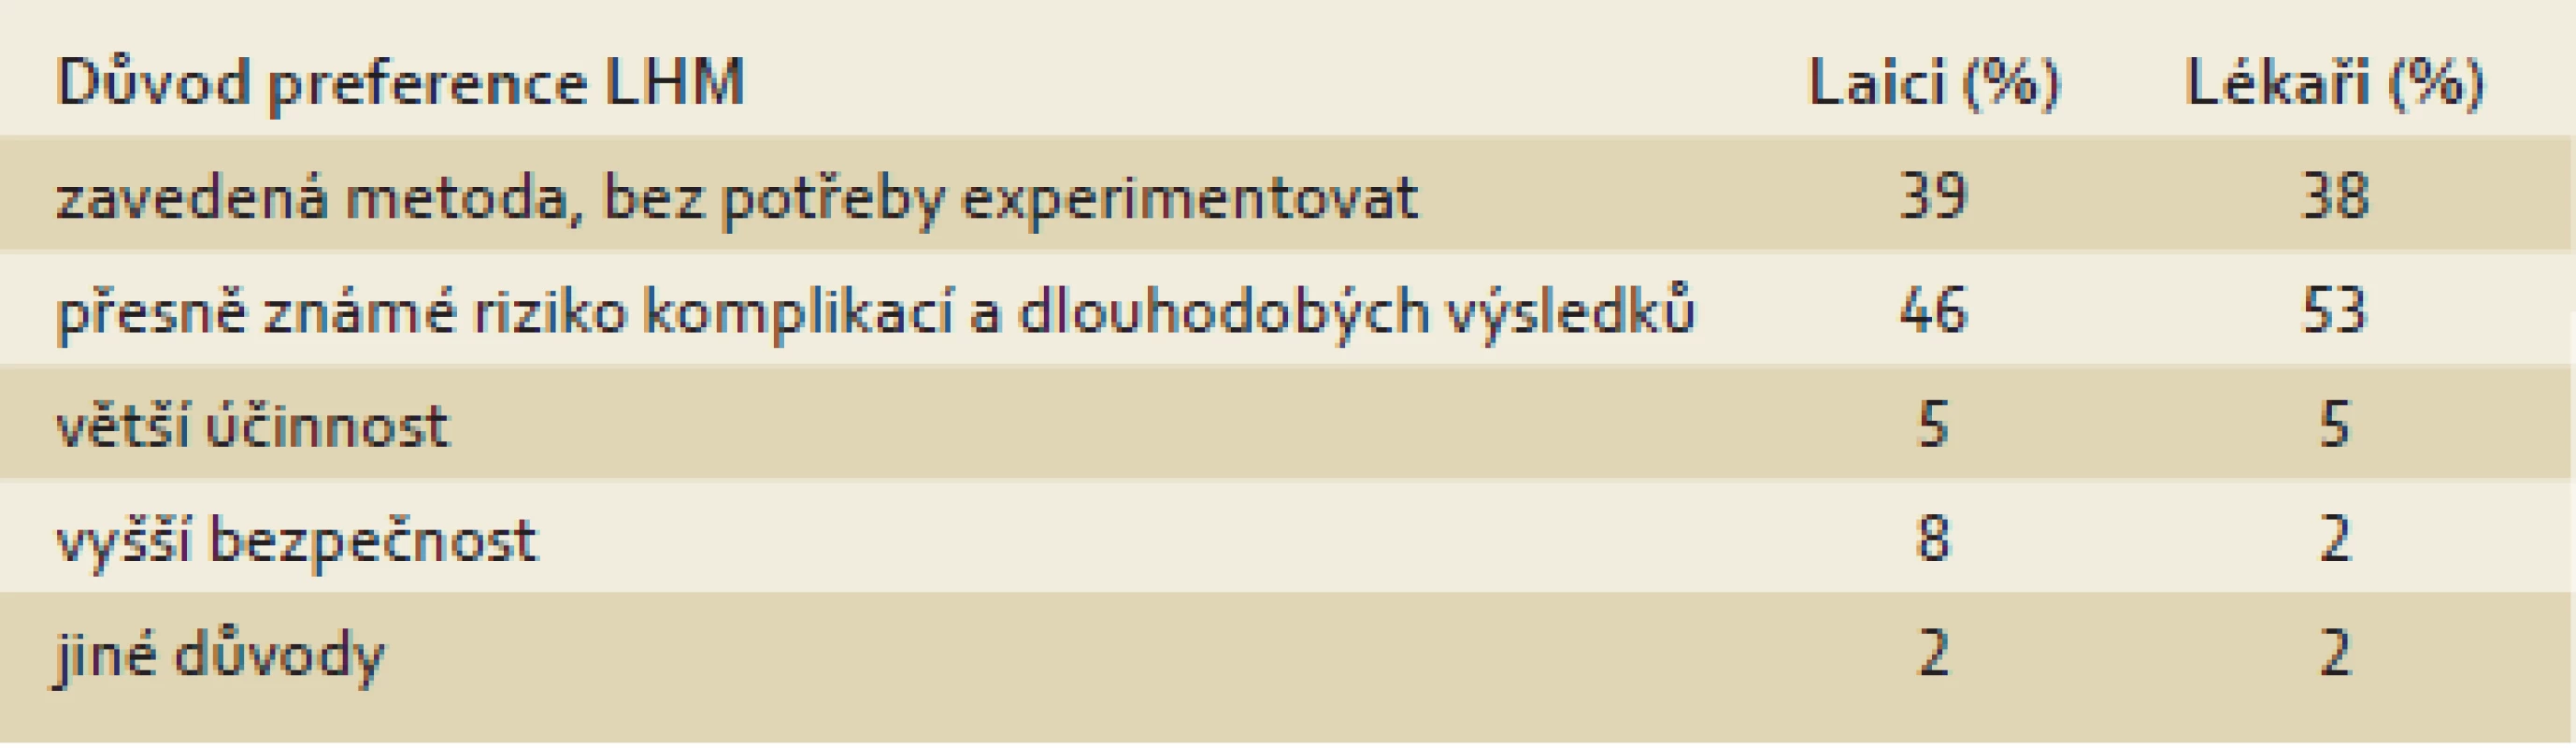 Důvody preference LHM.
Tab. 4. Reasons of preference for LHM.